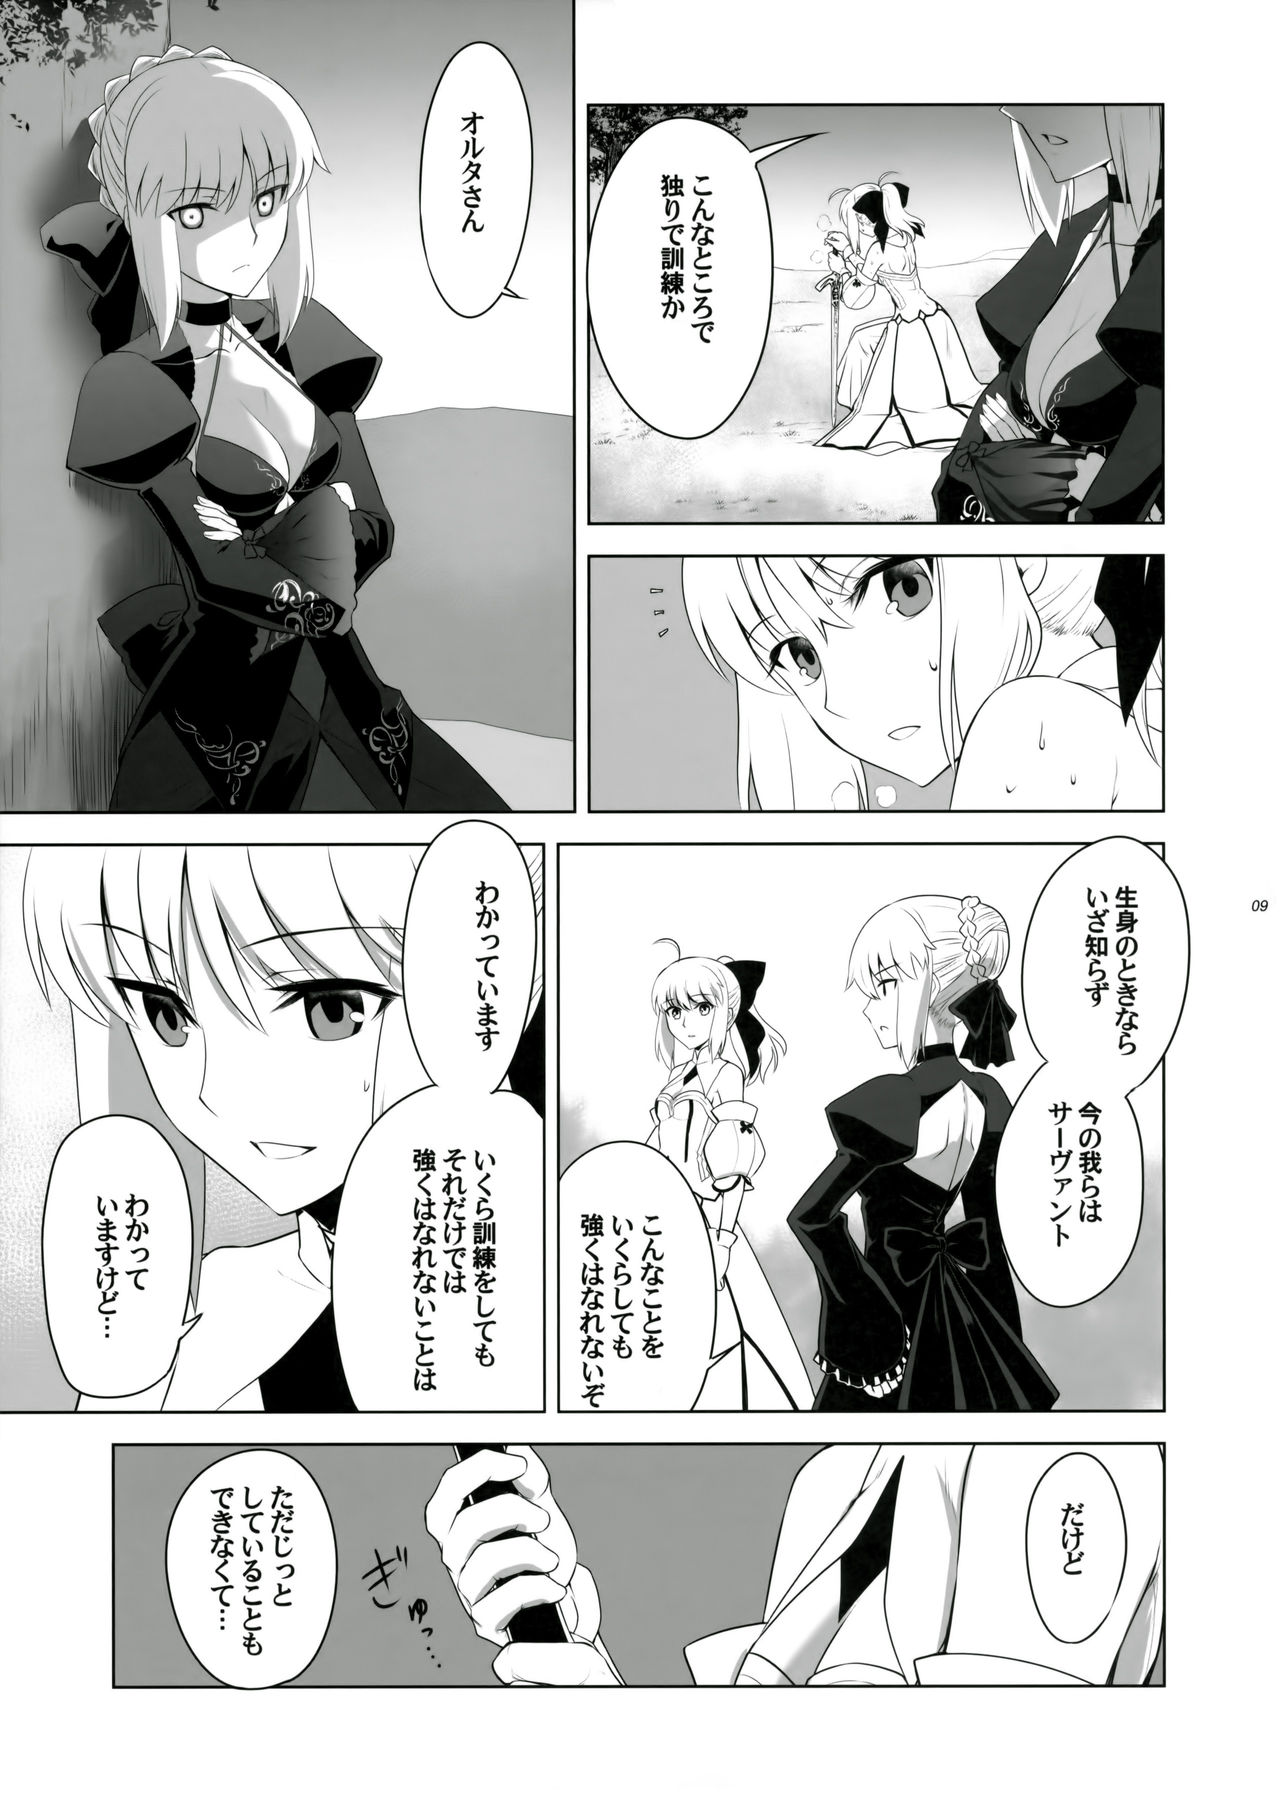 [CRAZY CLOVER CLUB (Kuroha Nue)] T*MOON COMPLEX GO 05 [Red] (Fate/Grand Order) page 8 full